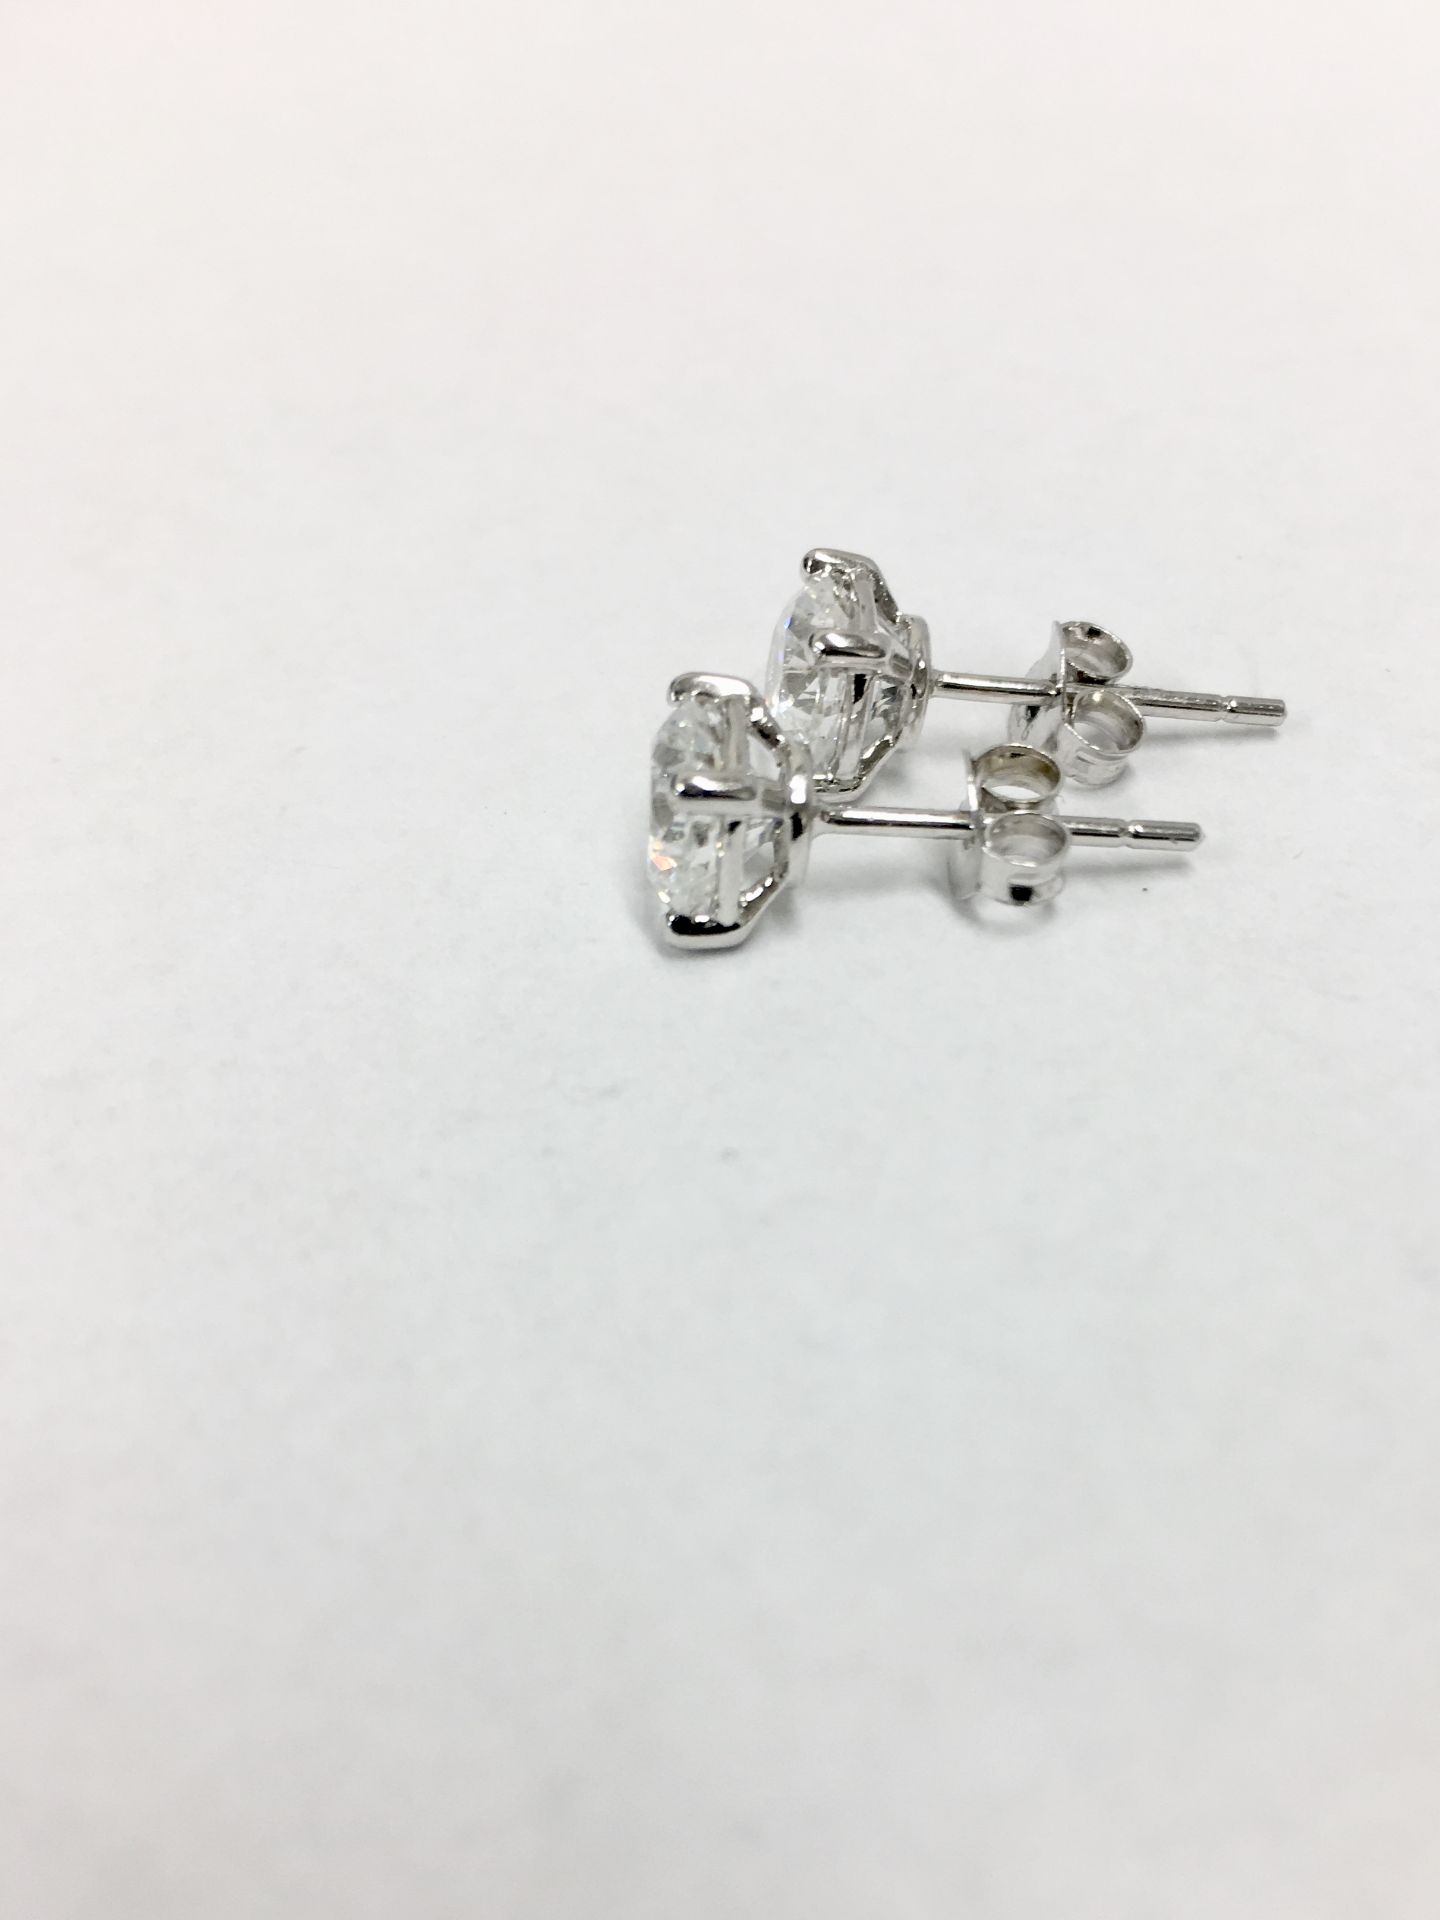 1.20Ct Diamond Solitaire Earrings Set In 18Ct White Gold. - Image 3 of 12